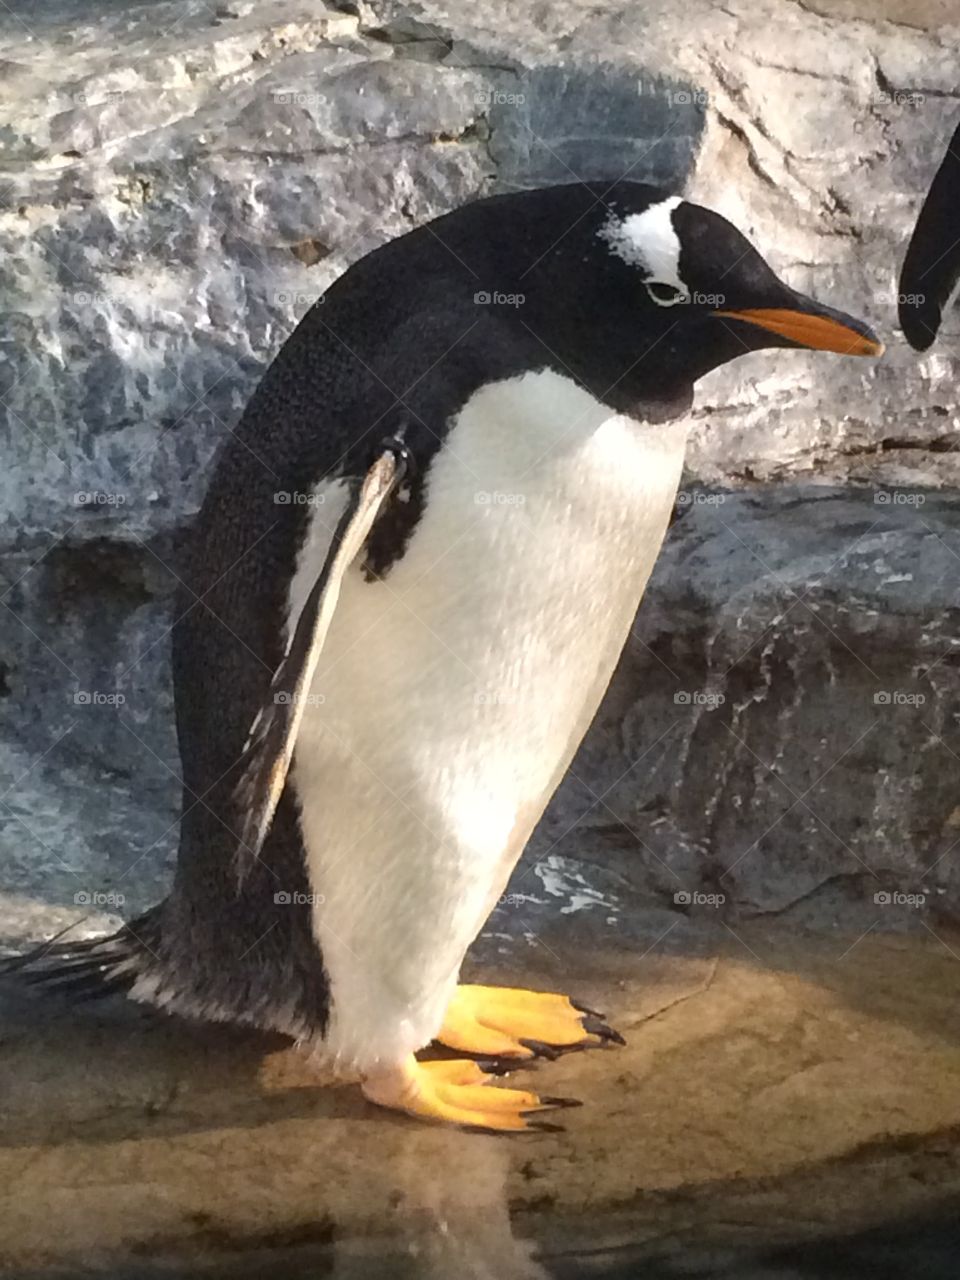 Penguin at the zoo 